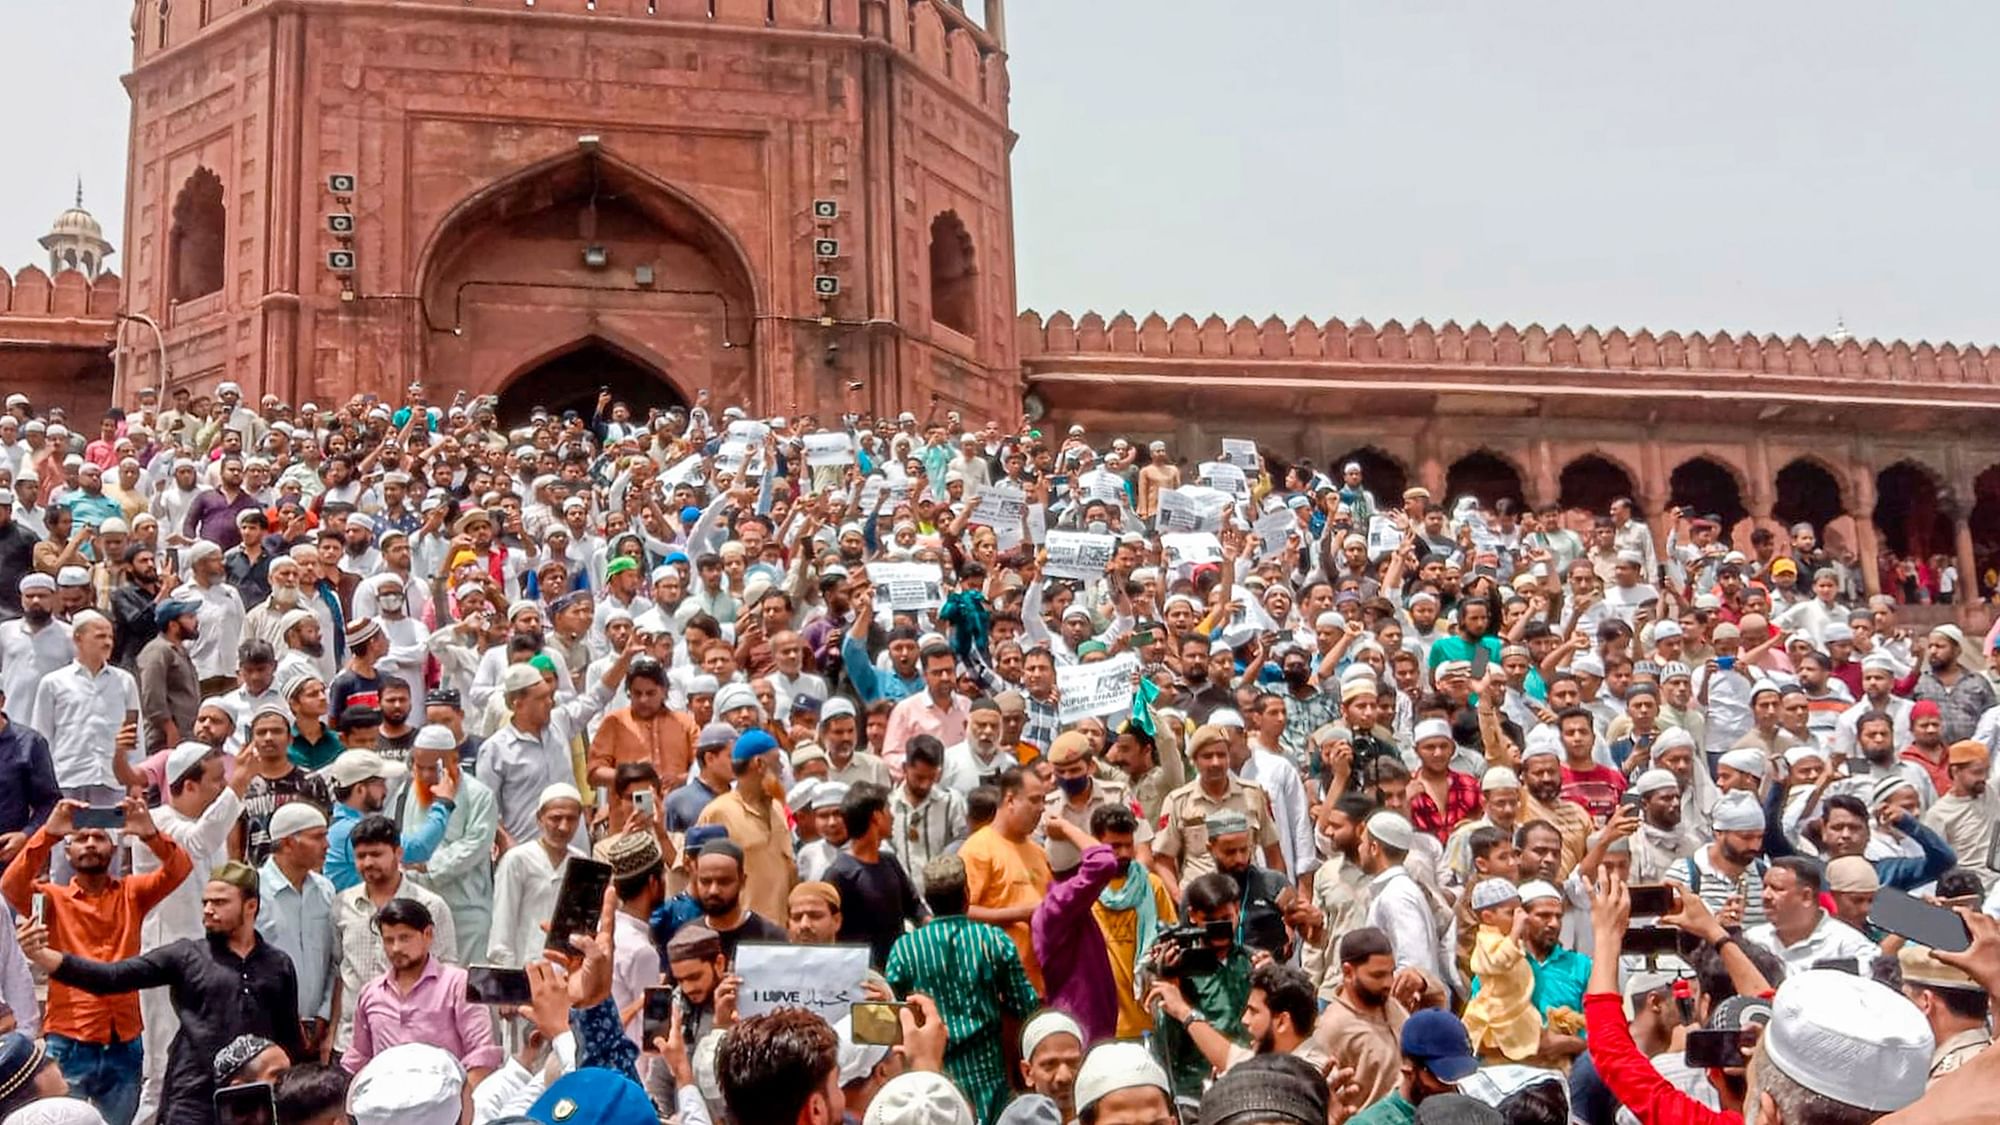 <div class="paragraphs"><p>Over 300 people staged a protest at Delhi's Jama Masjid against former Bharatiya Janata Party (<a href="https://www.thequint.com/news/politics/rajya-sabha-election-rajasthan-congress-wins-big-bjp-backed-subhash-chandra-loses">BJP</a>) spokesperson <a href="https://www.thequint.com/news/india/bjp-suspends-fringe-element-nupur-sharma-but-is-this-the-first-such-case">Nupur Sharma</a> and ex-leader <a href="https://www.thequint.com/news/politics/west-bengal-chief-minister-mamata-banerjee-condemns-remark-on-prophet-muhammad-demands-arrest">Naveen Jindal</a> for inflammatory remarks against Prophet Muhammad on Friday, 10 June.</p></div>